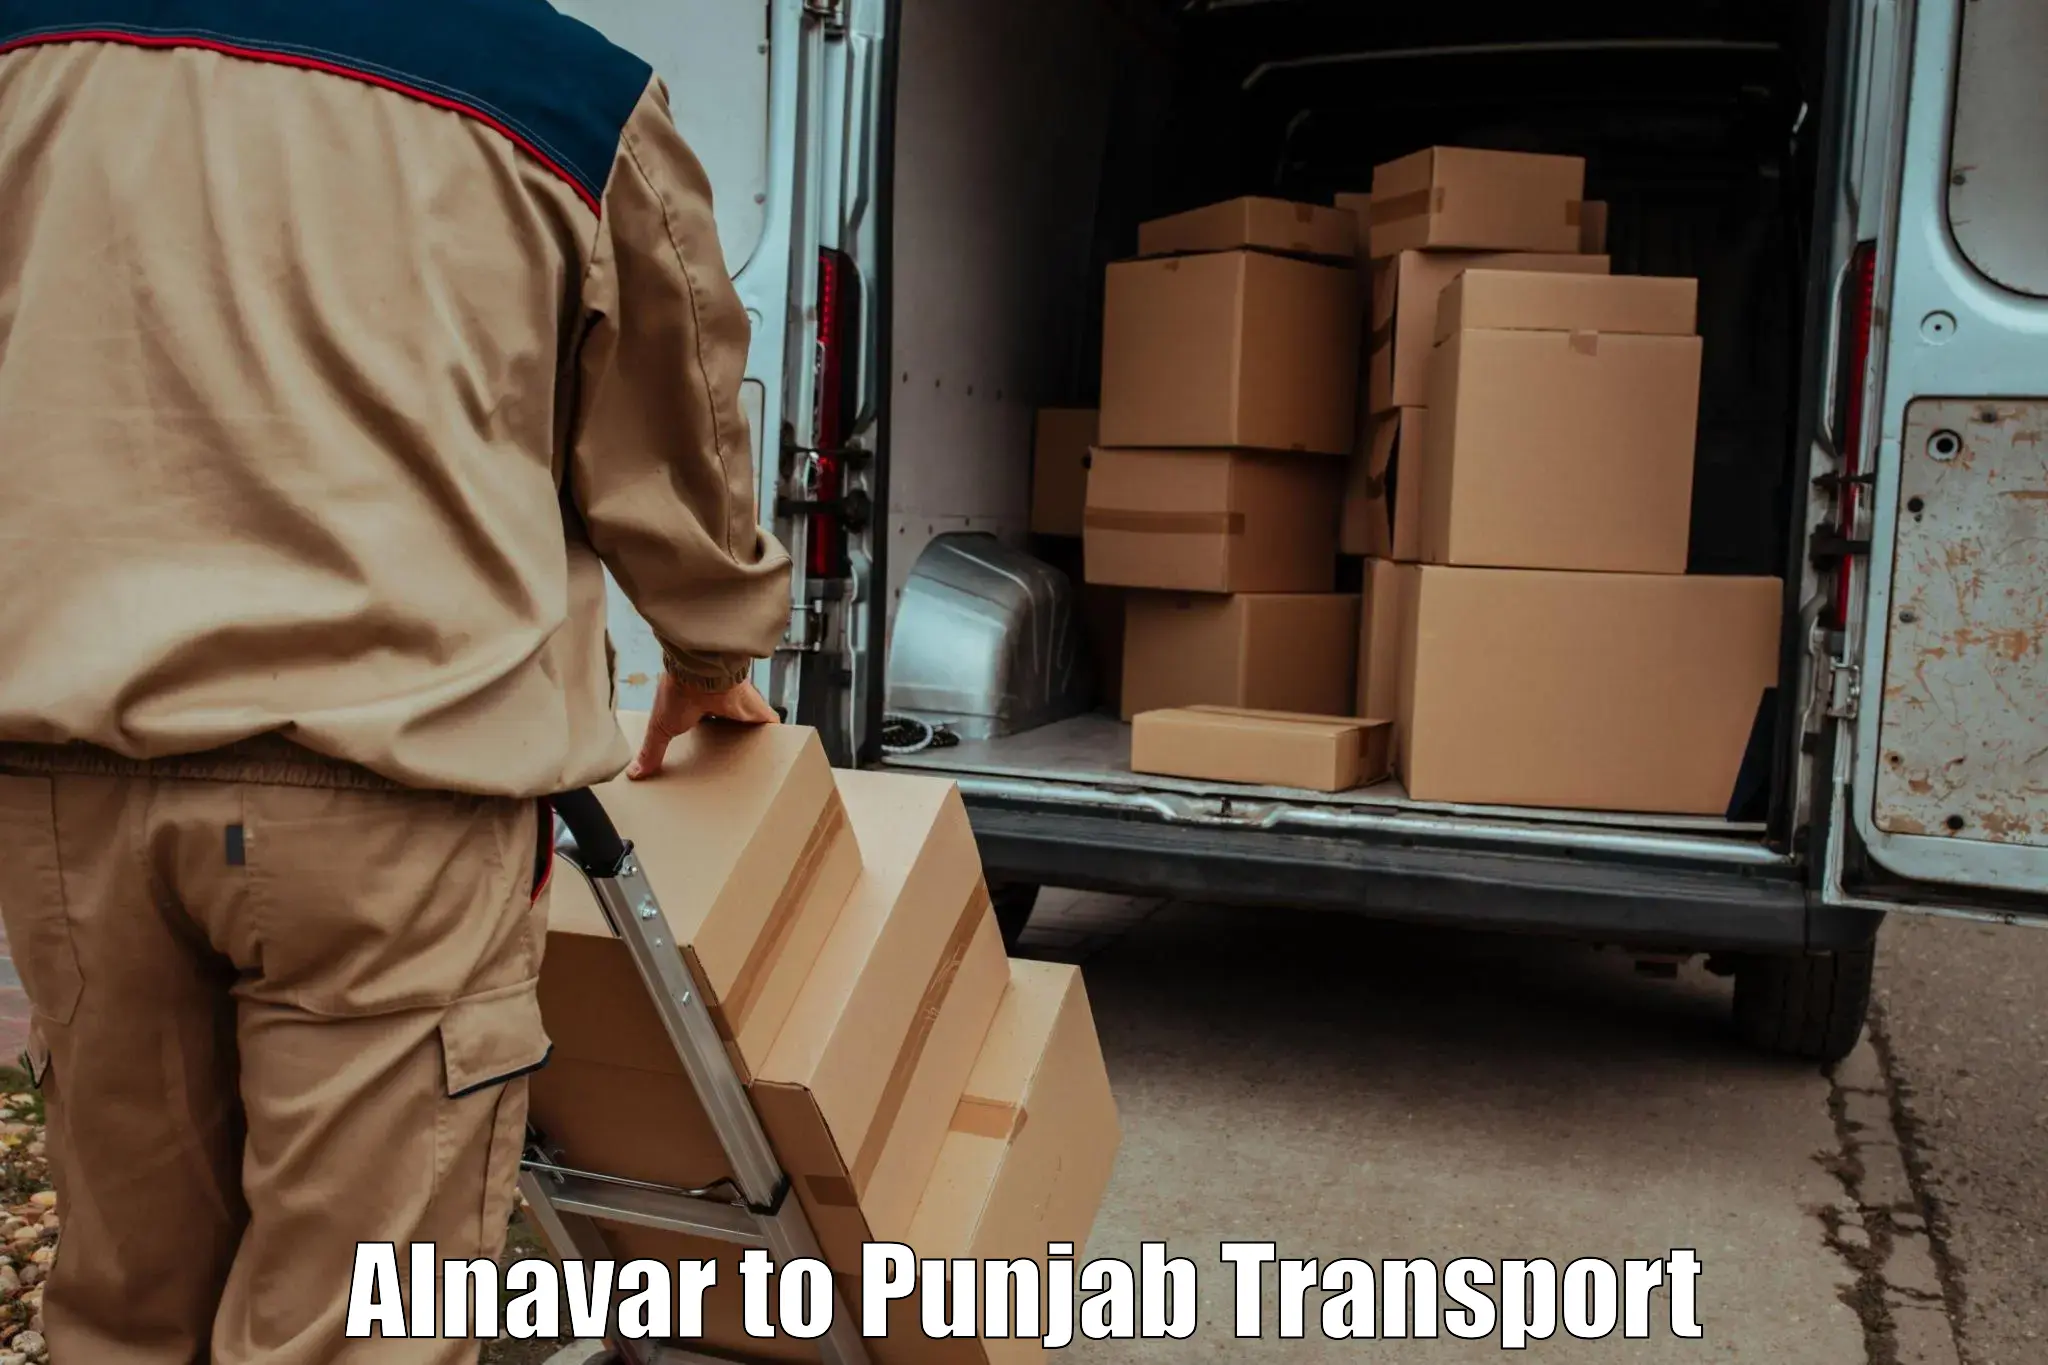 Package delivery services Alnavar to Fatehgarh Sahib